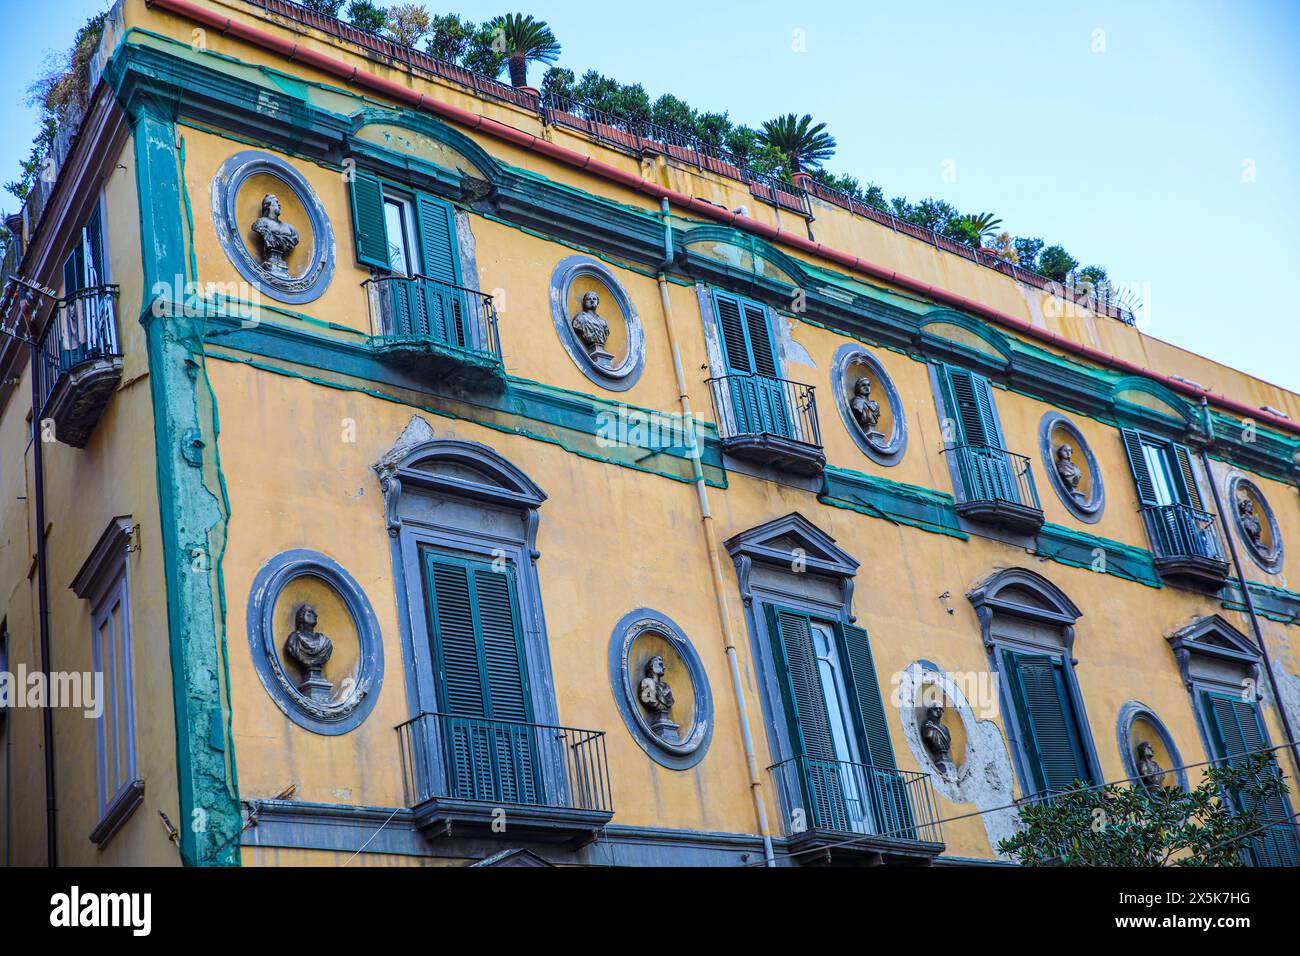 Naples, Italy. Mediterranean yellow building with green-blue balconies, shutters and statues Stock Photo